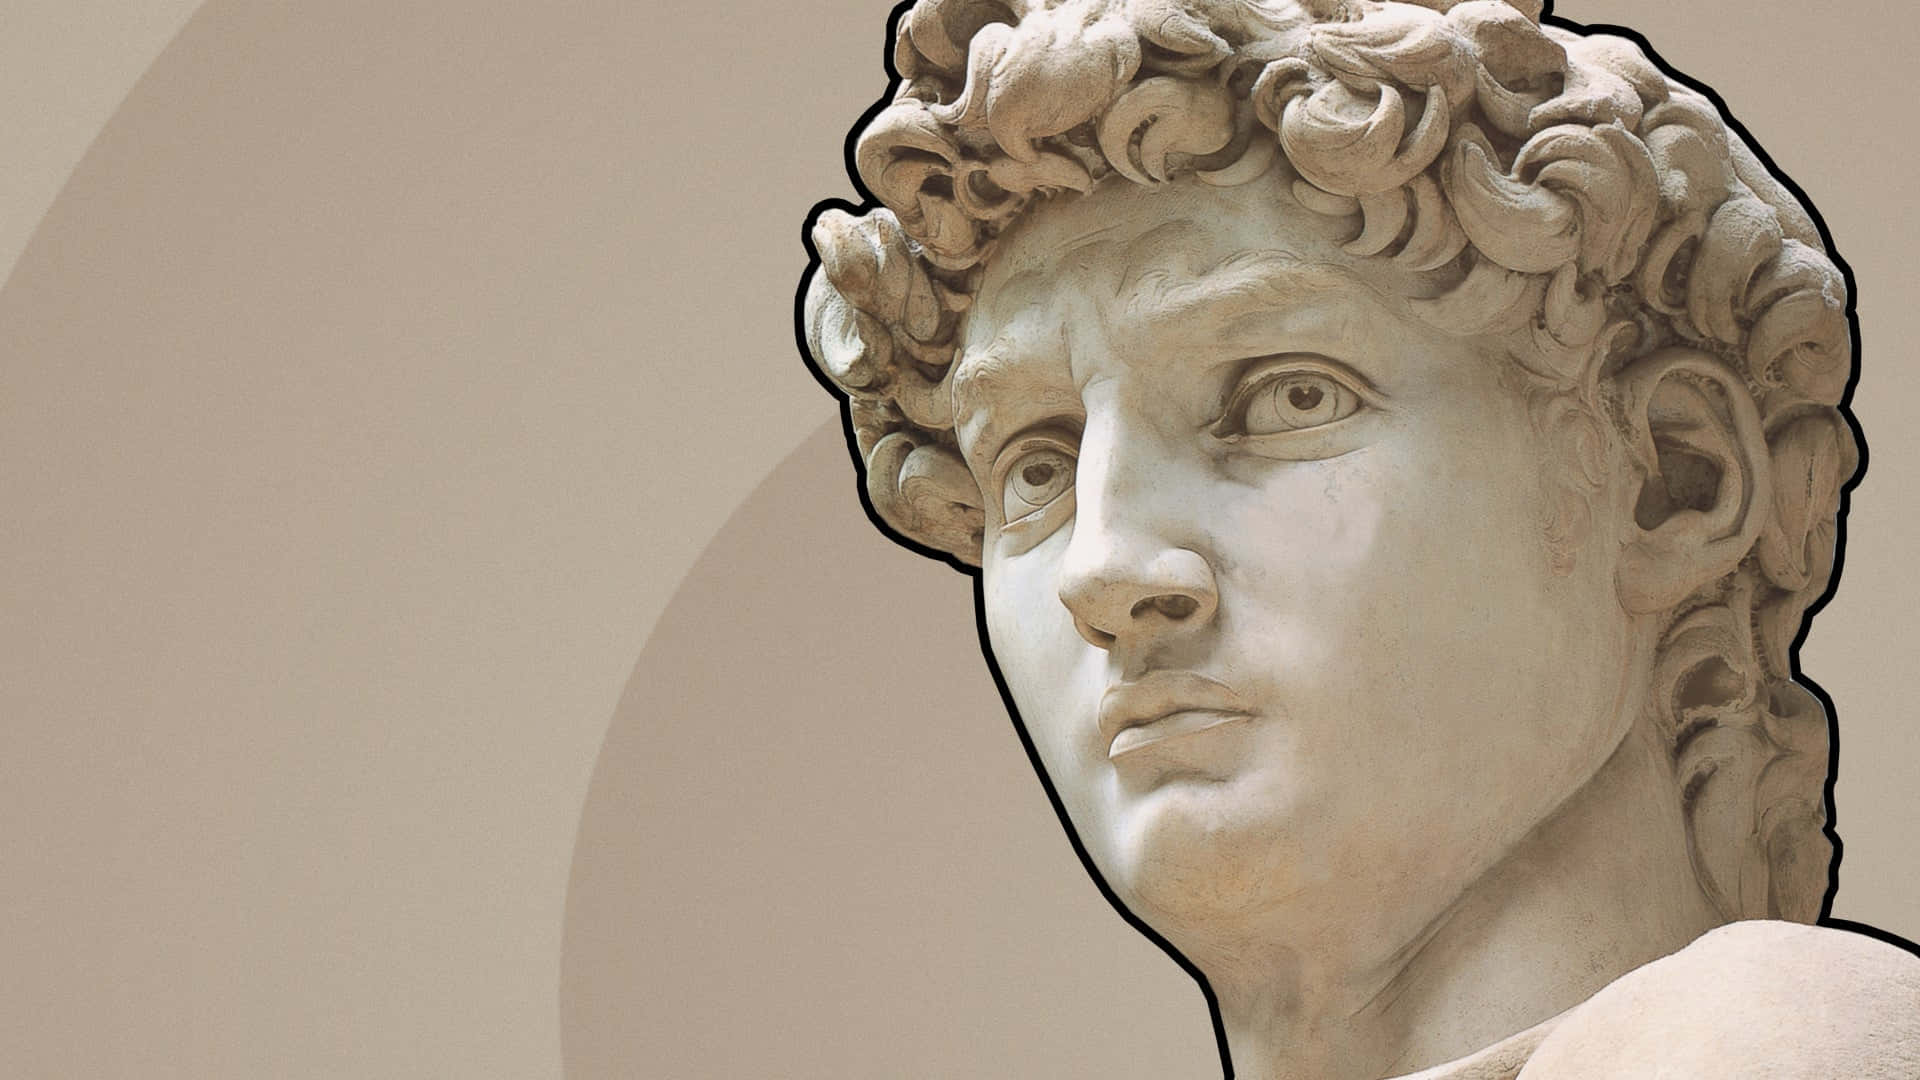 A Statue Of A Man With Curly Hair Wallpaper